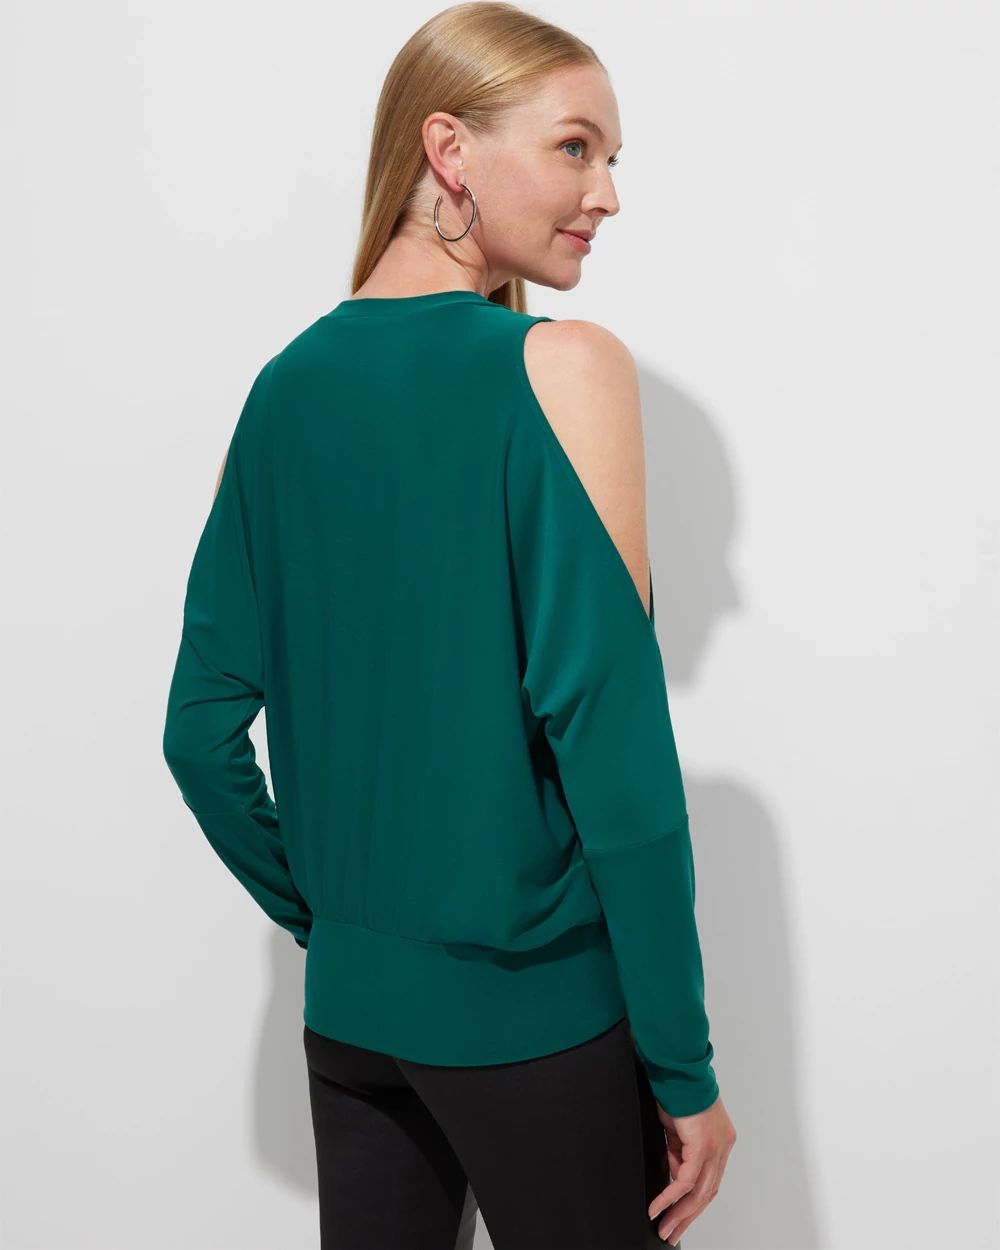 Outlet WHBM Cold Shoulder Top click to view larger image.